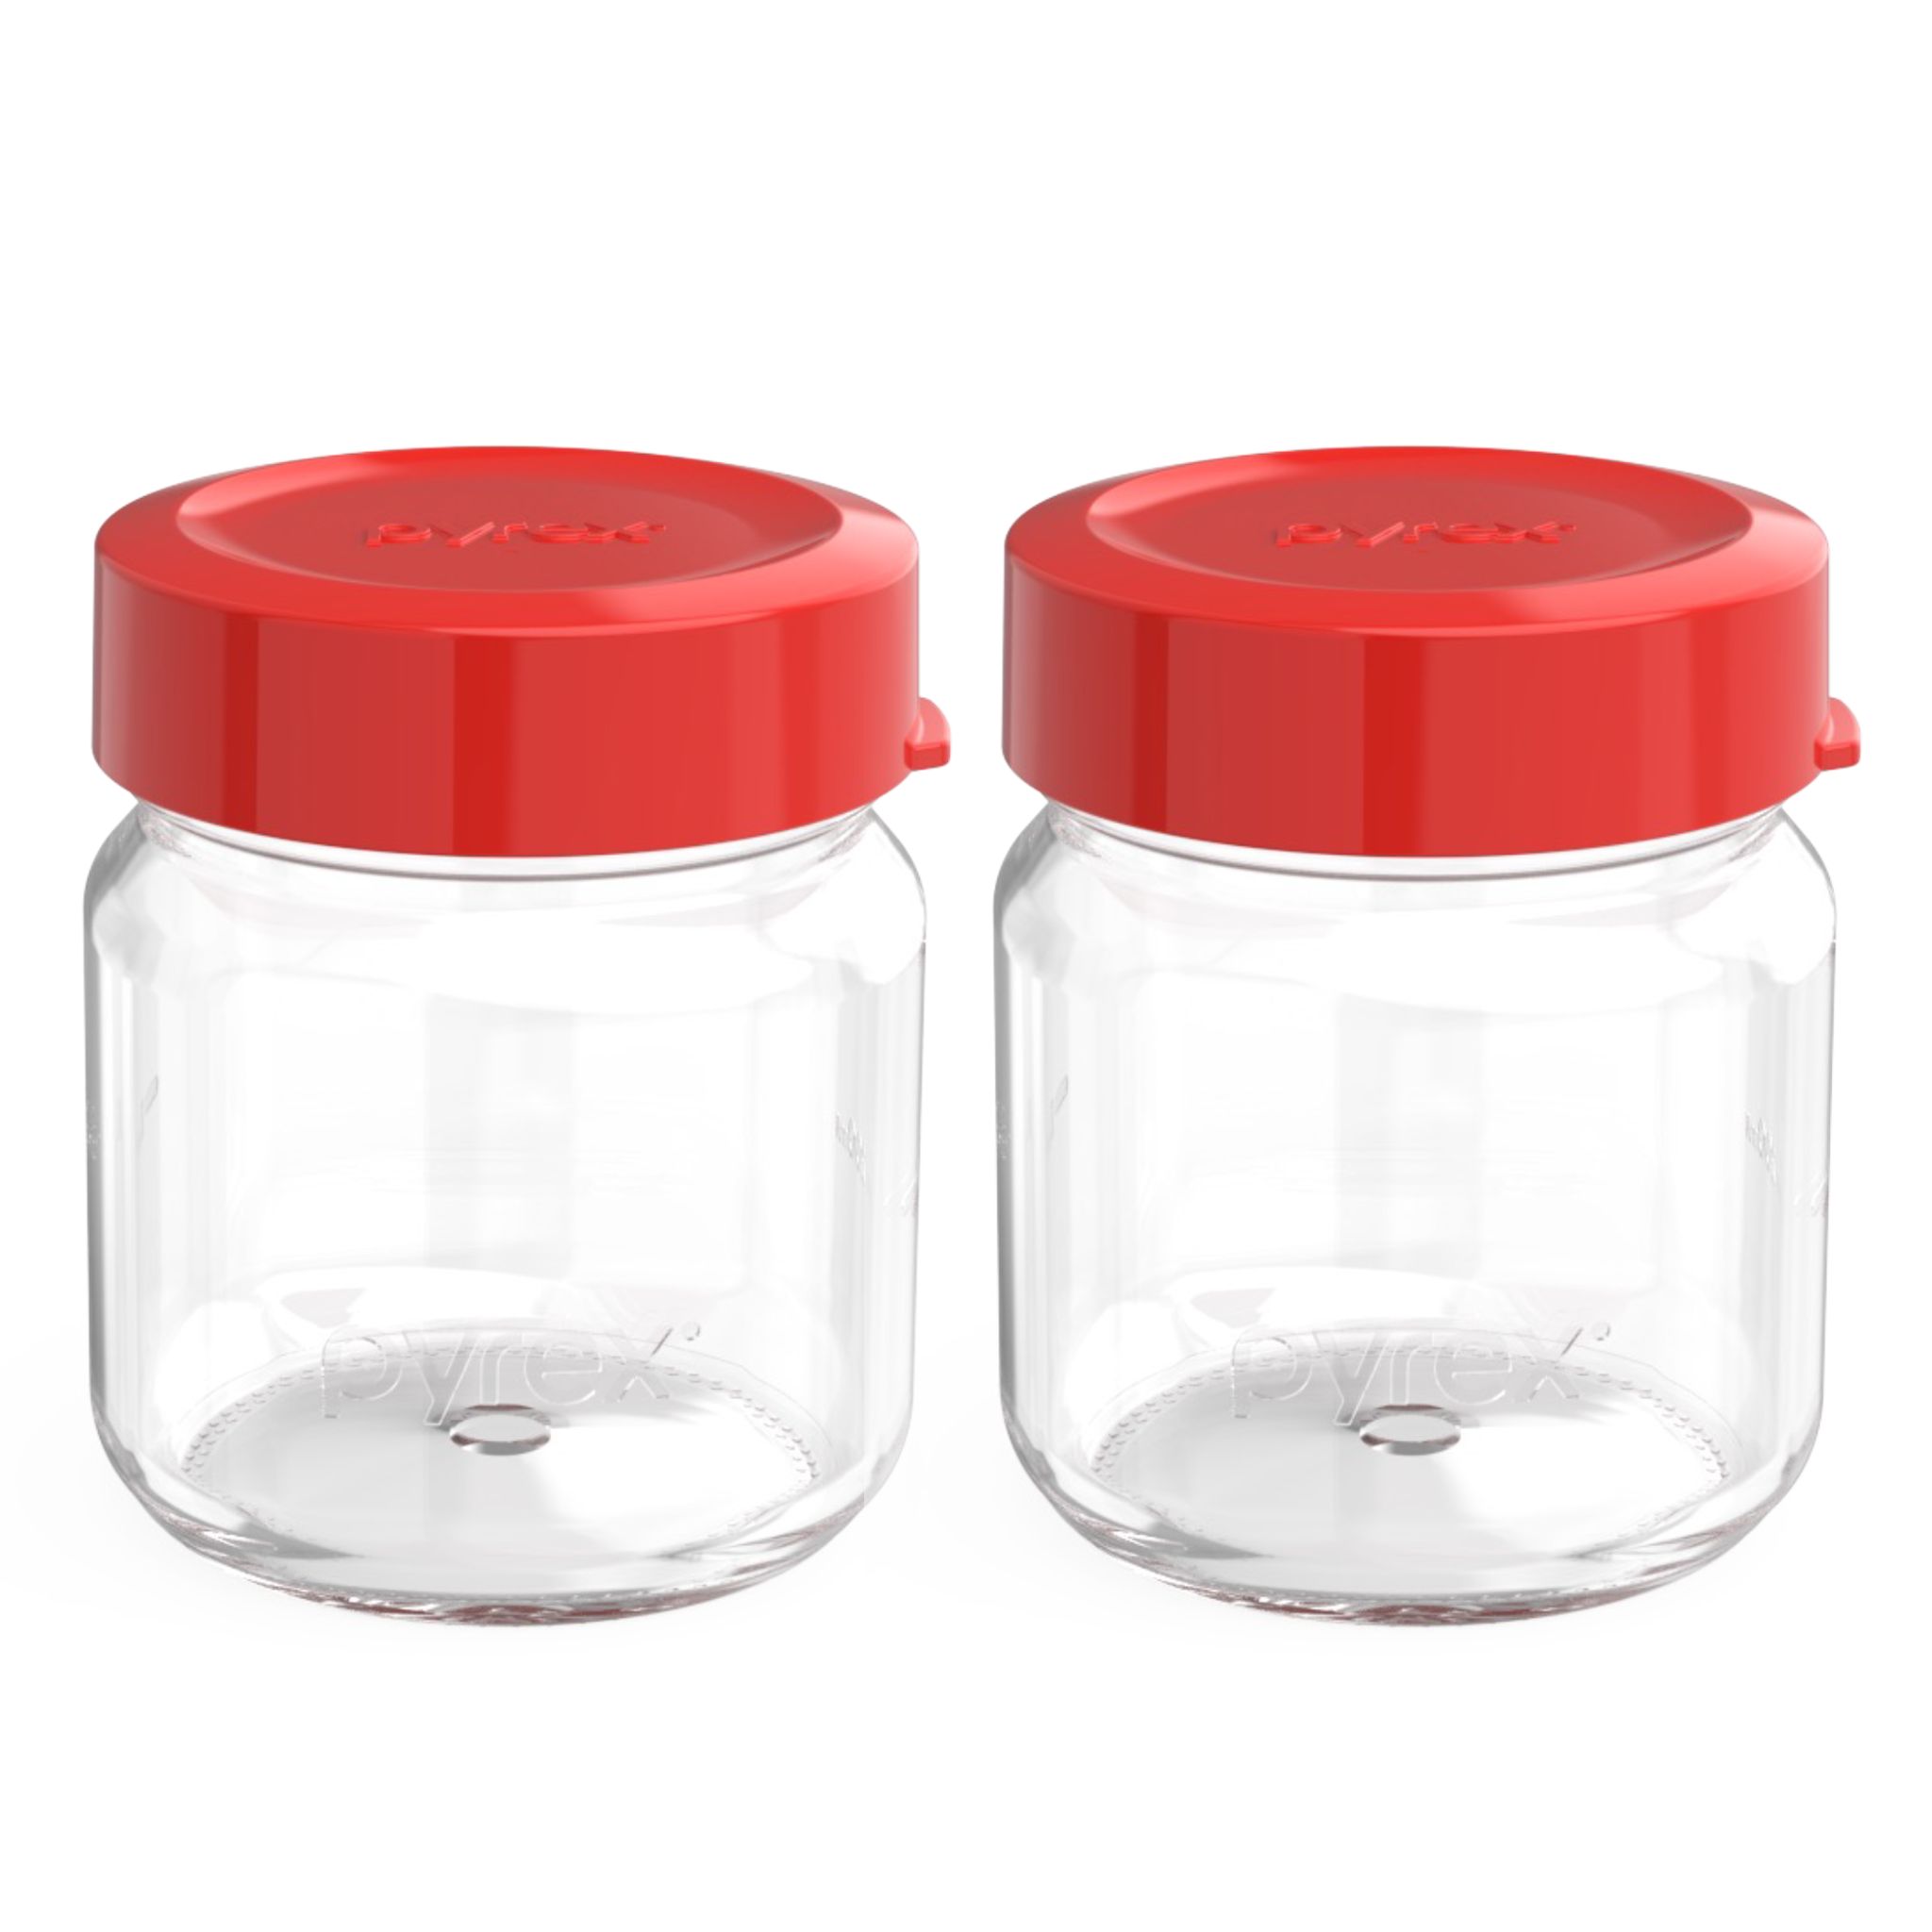 22.8 Cups, Set of 3 pieces Snapware Food Storage Airtight Container Extra Large 